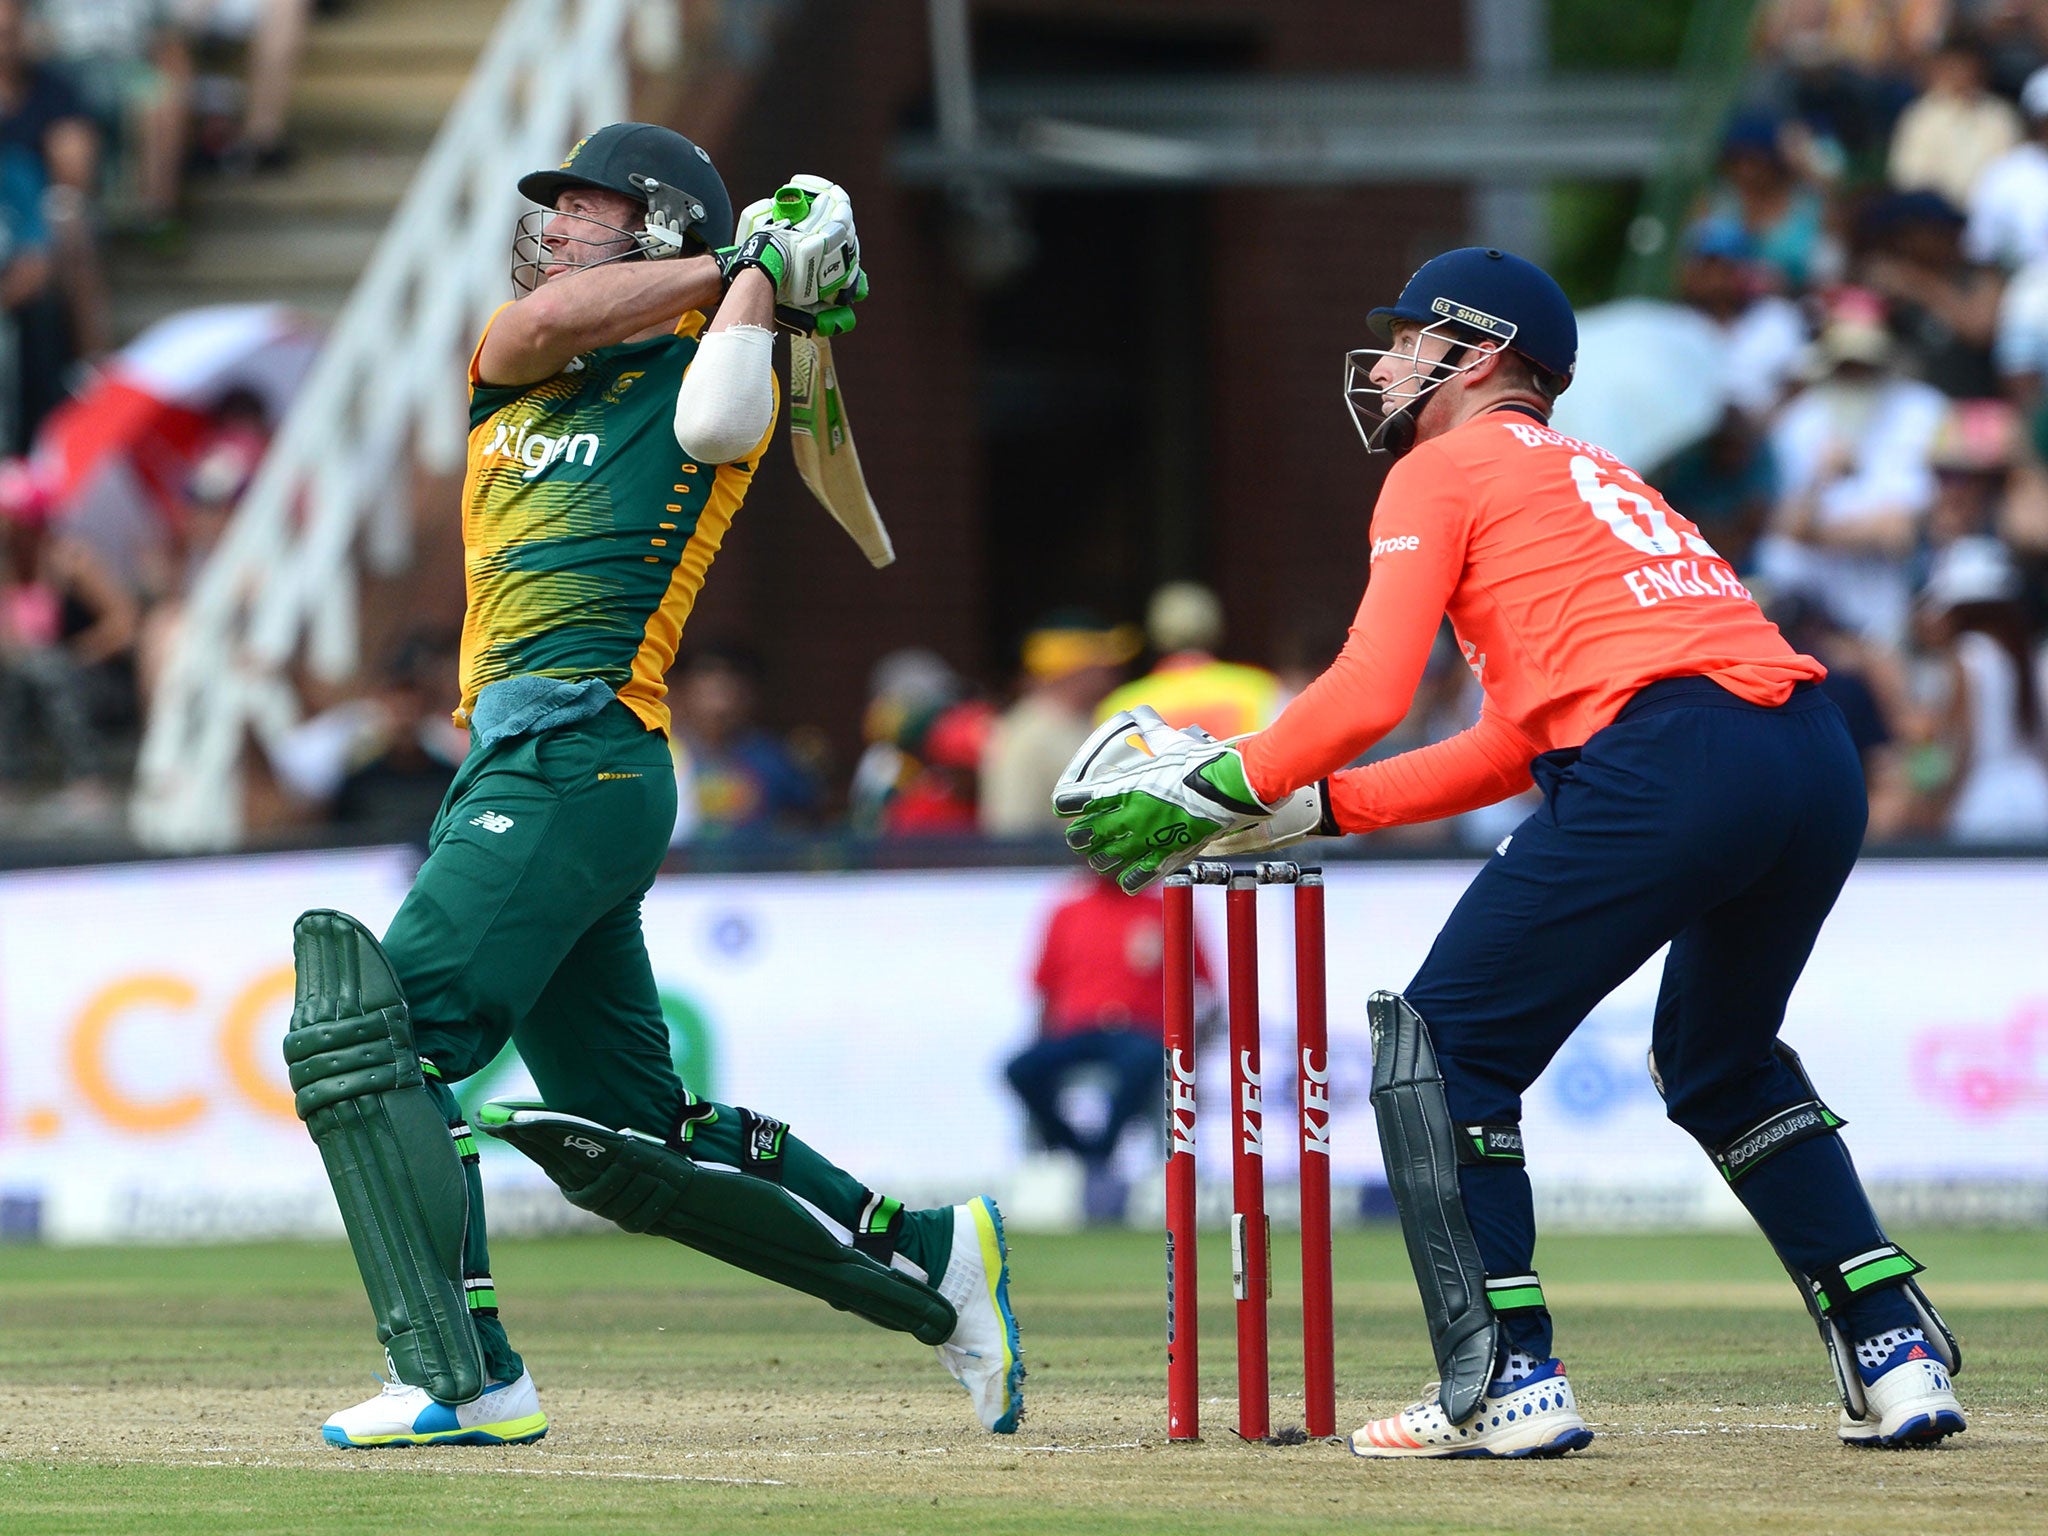 The South Africa captain, AB de Villiers, hits out during his blistering 71 from 29 balls